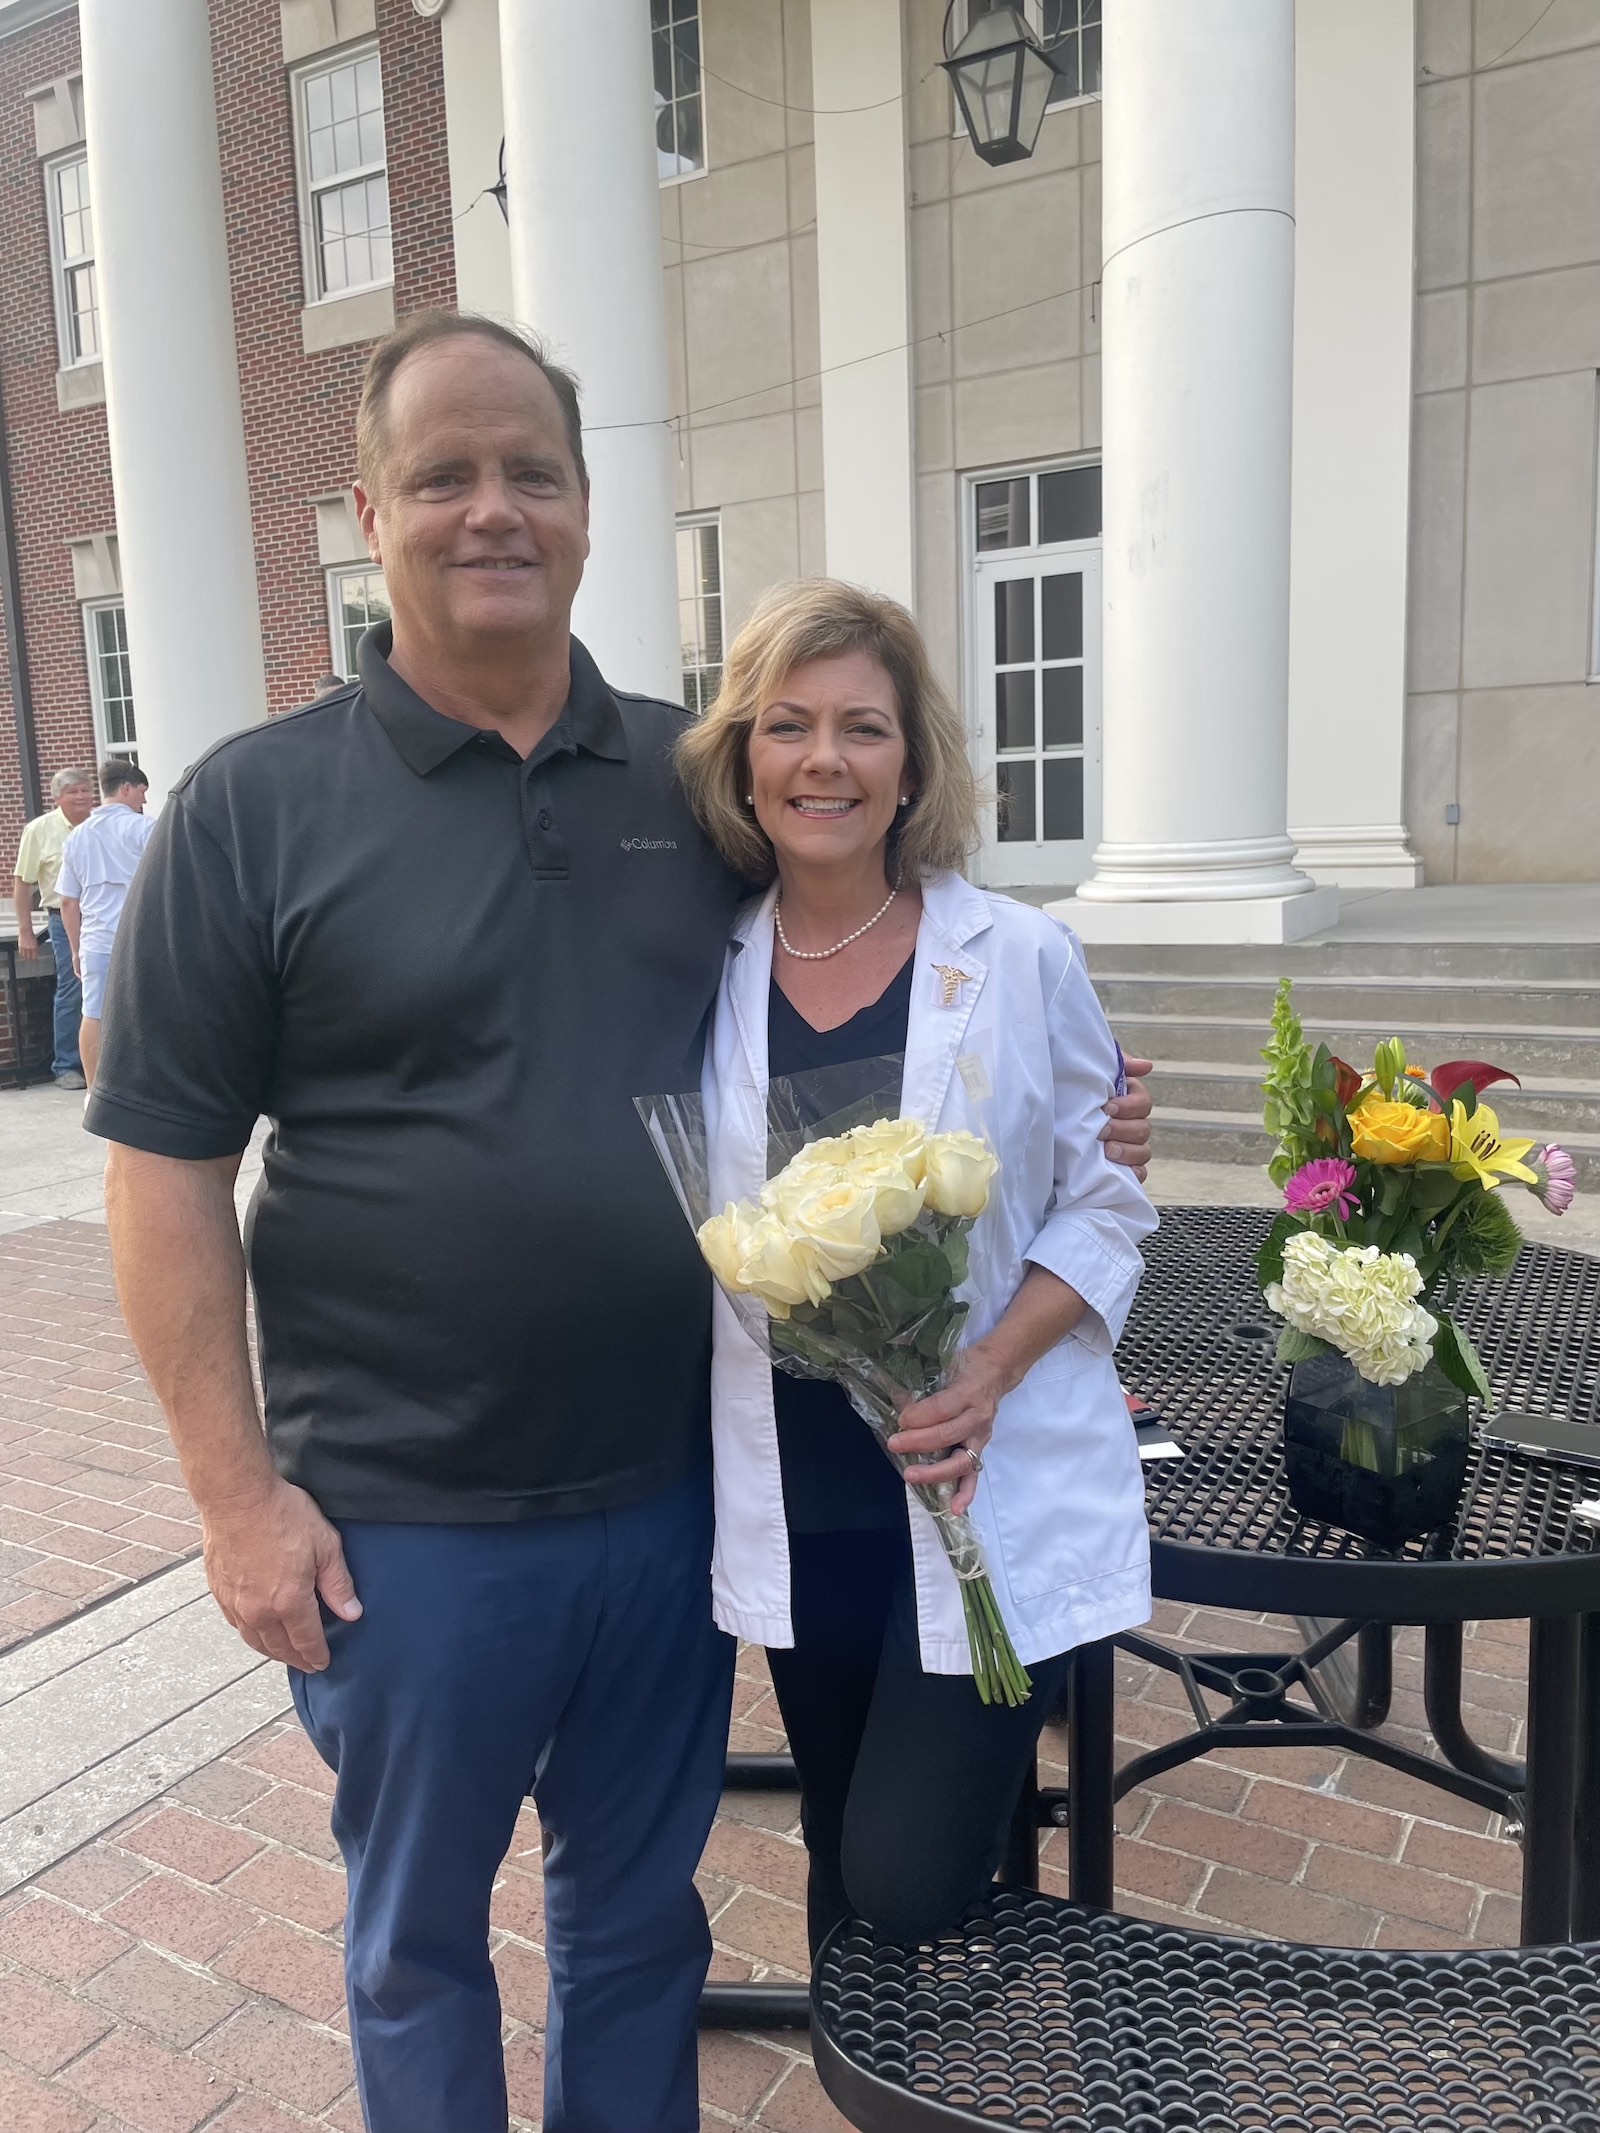 Cindy Hollander with her husband, Steve, following graduation from Tech’s Whitson-Hester School of Nursing.